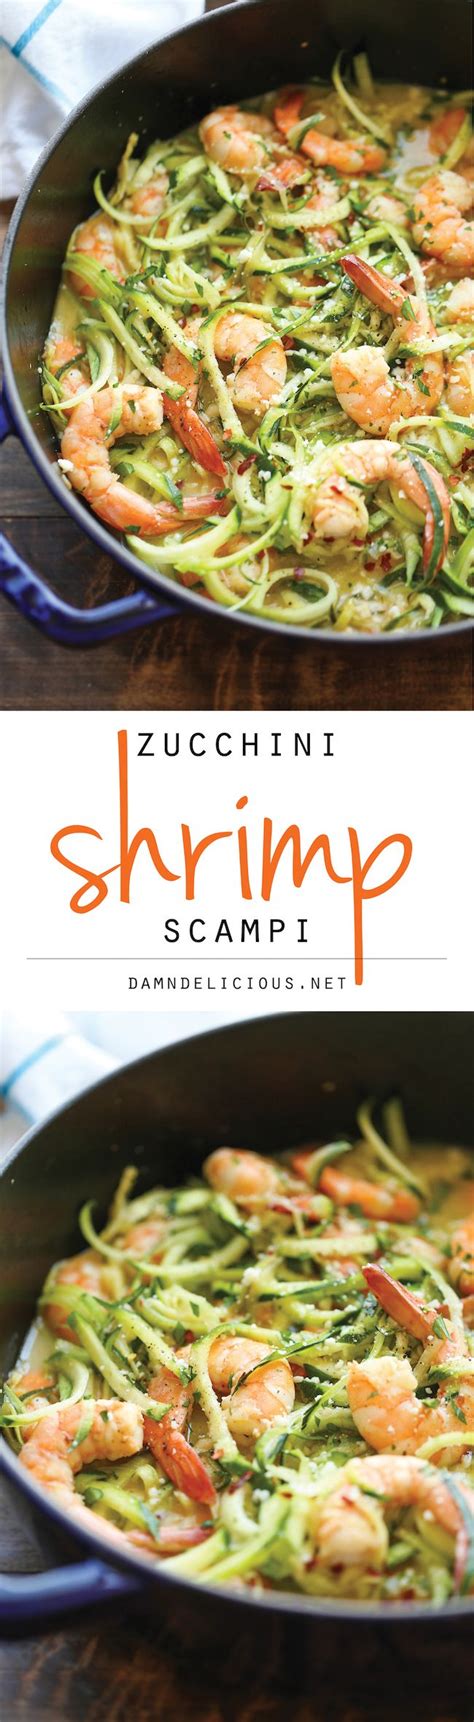 Shrimp Scampp In A Skillet With Broccoli And Carrots